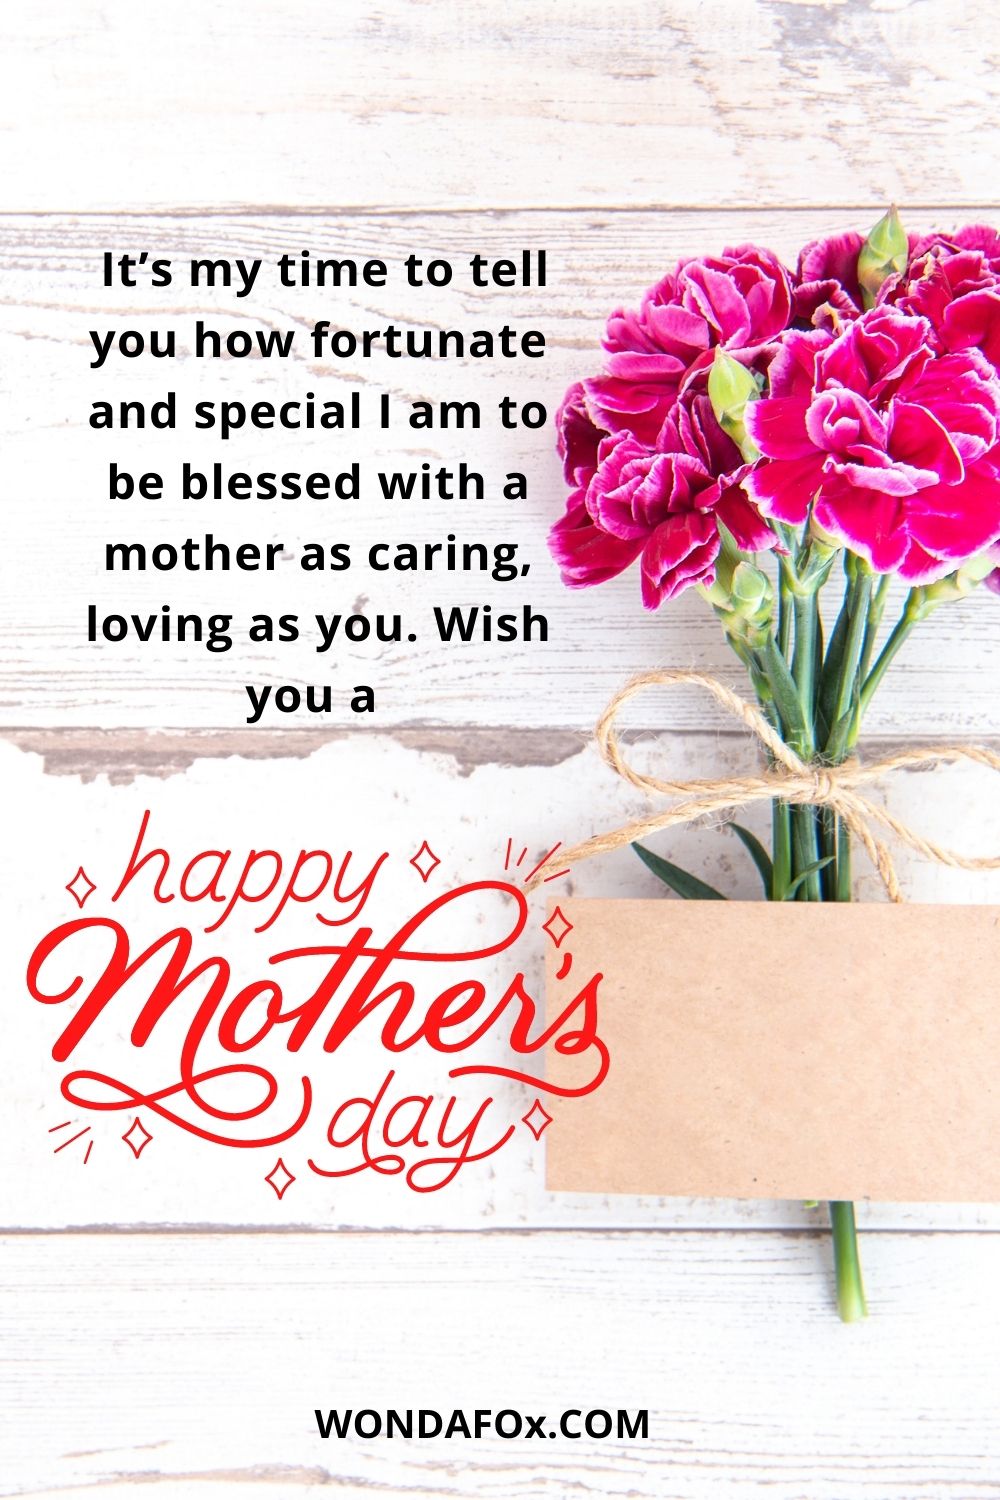  It’s my time to tell you how fortunate and special I am to be blessed with a mother as caring, loving as you. Wish you a happy Mother’s Day, Mom!